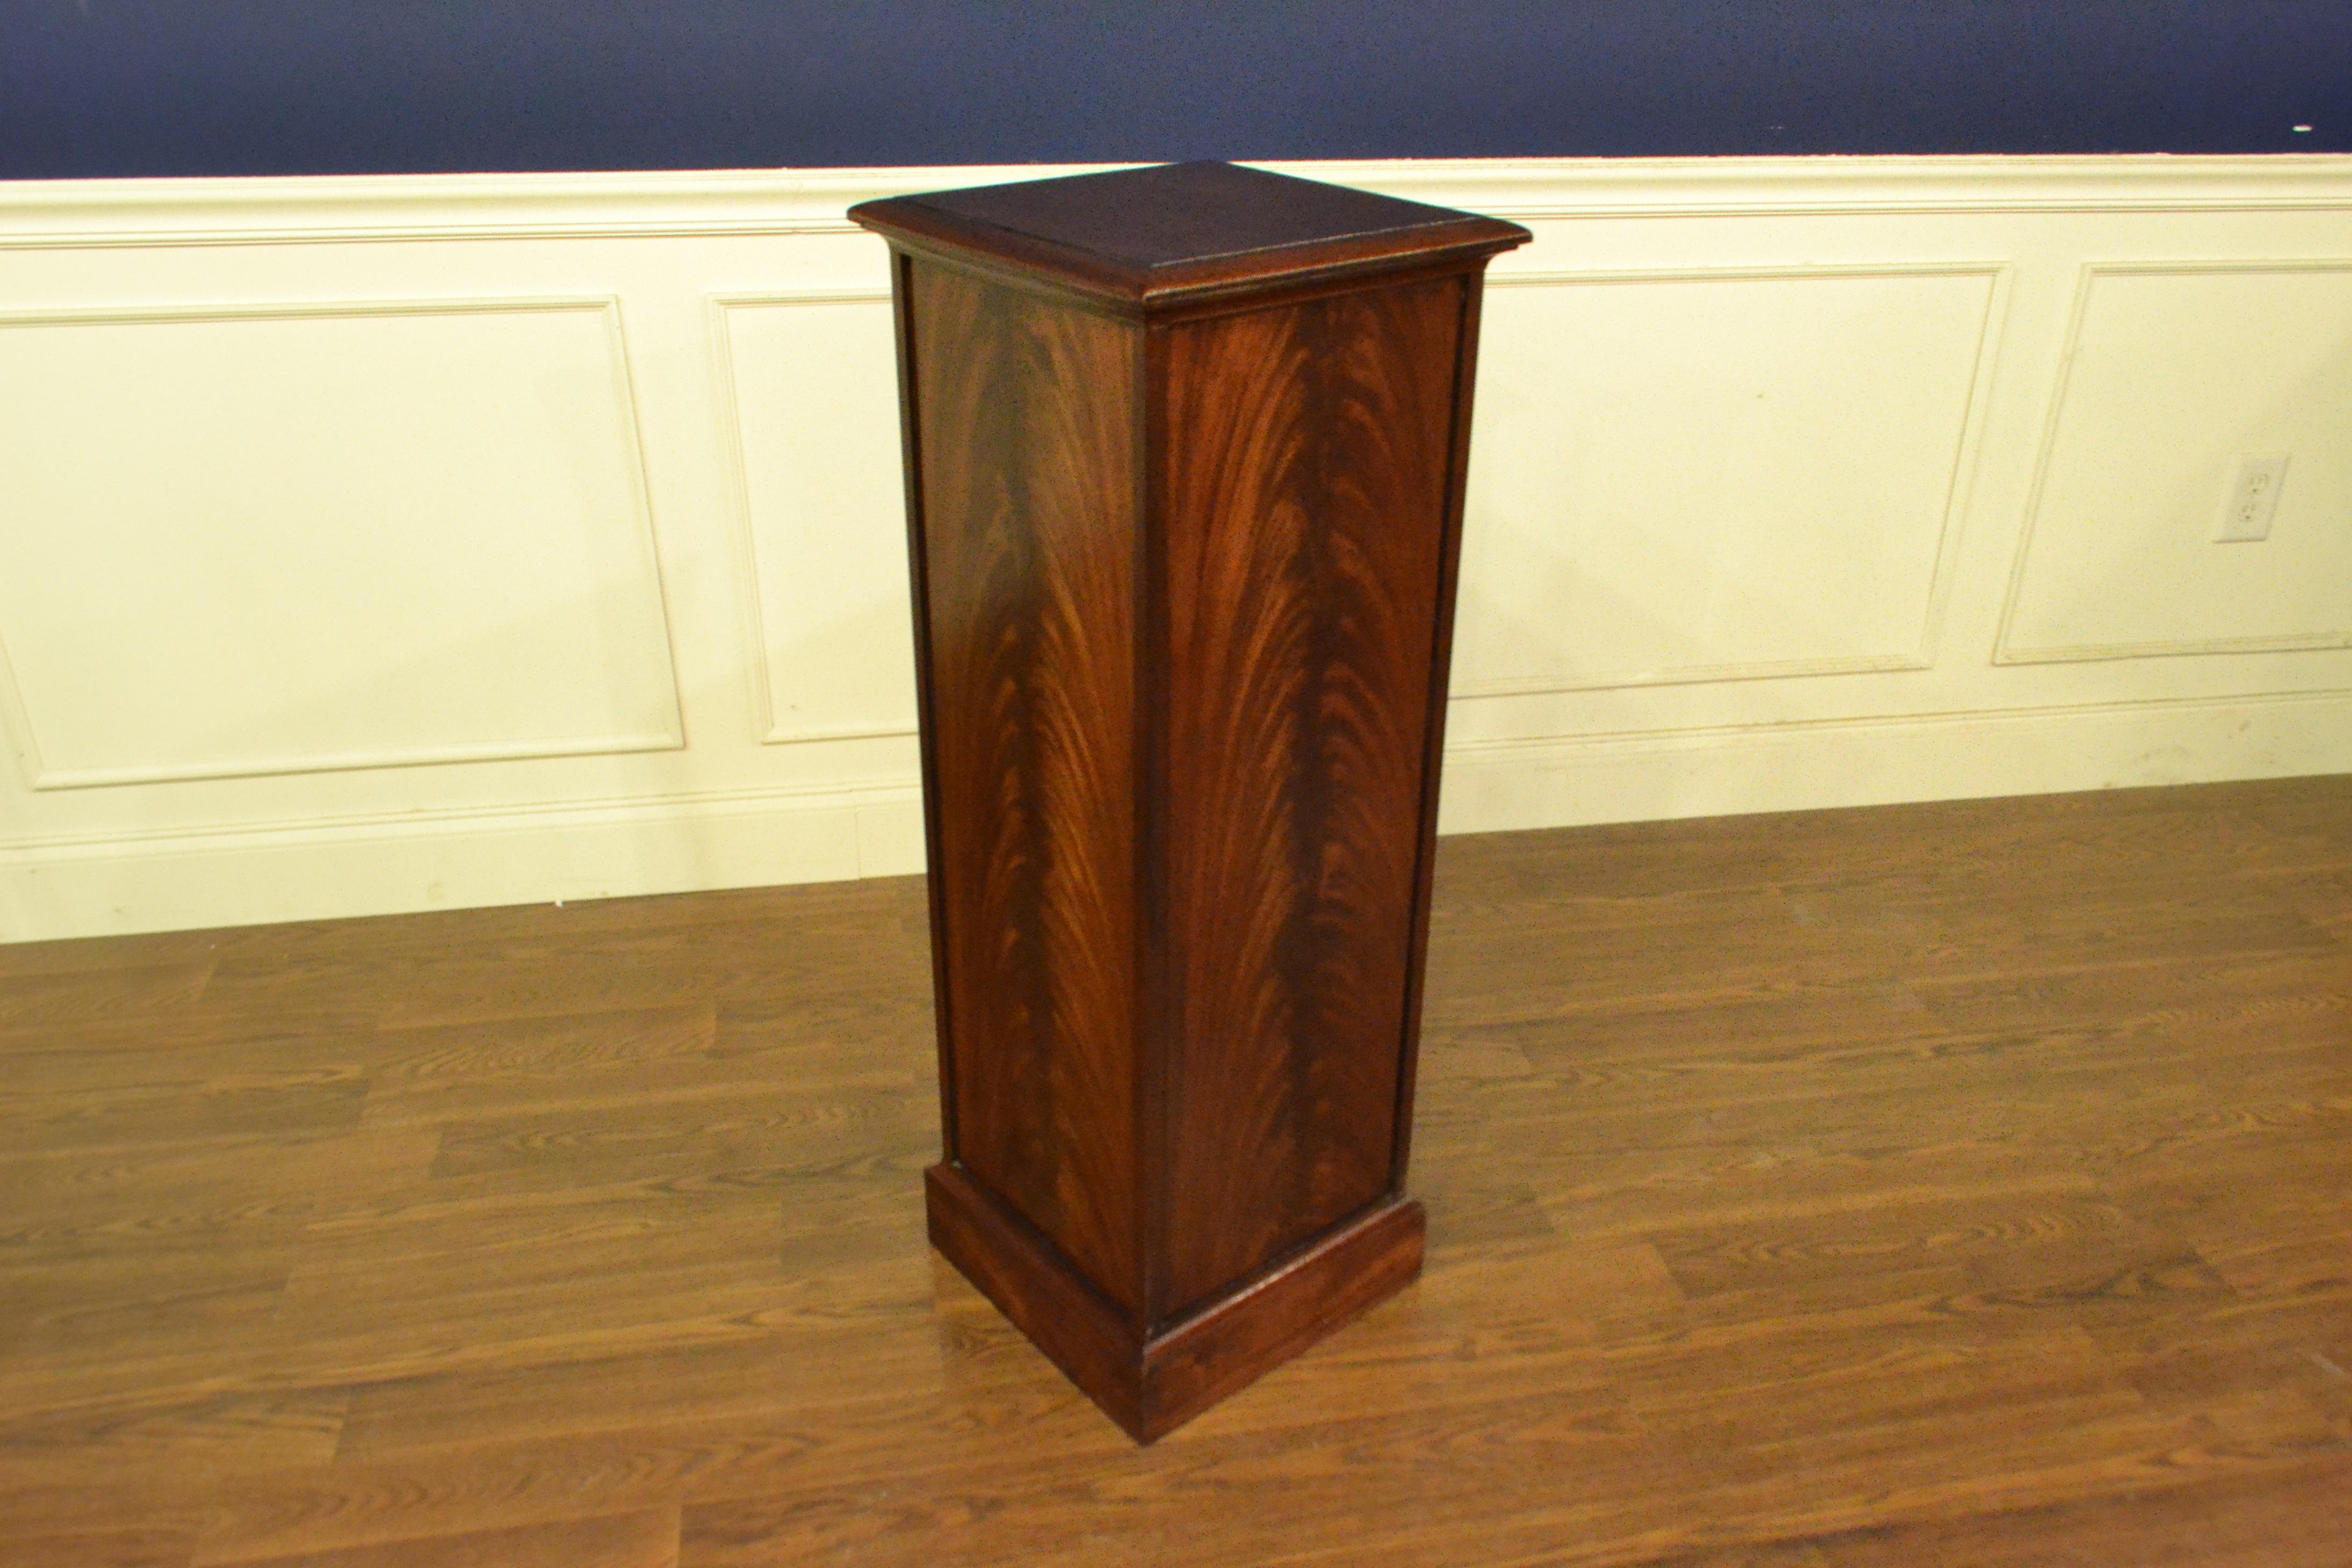 This is made-to-order traditional mahogany display pedestal made in the Leighton Hall shop. It’s four sides feature swirly crotch mahogany fields and the top is cathedral mahogany with a traditional ogee profiled edge. It is finished in a satin